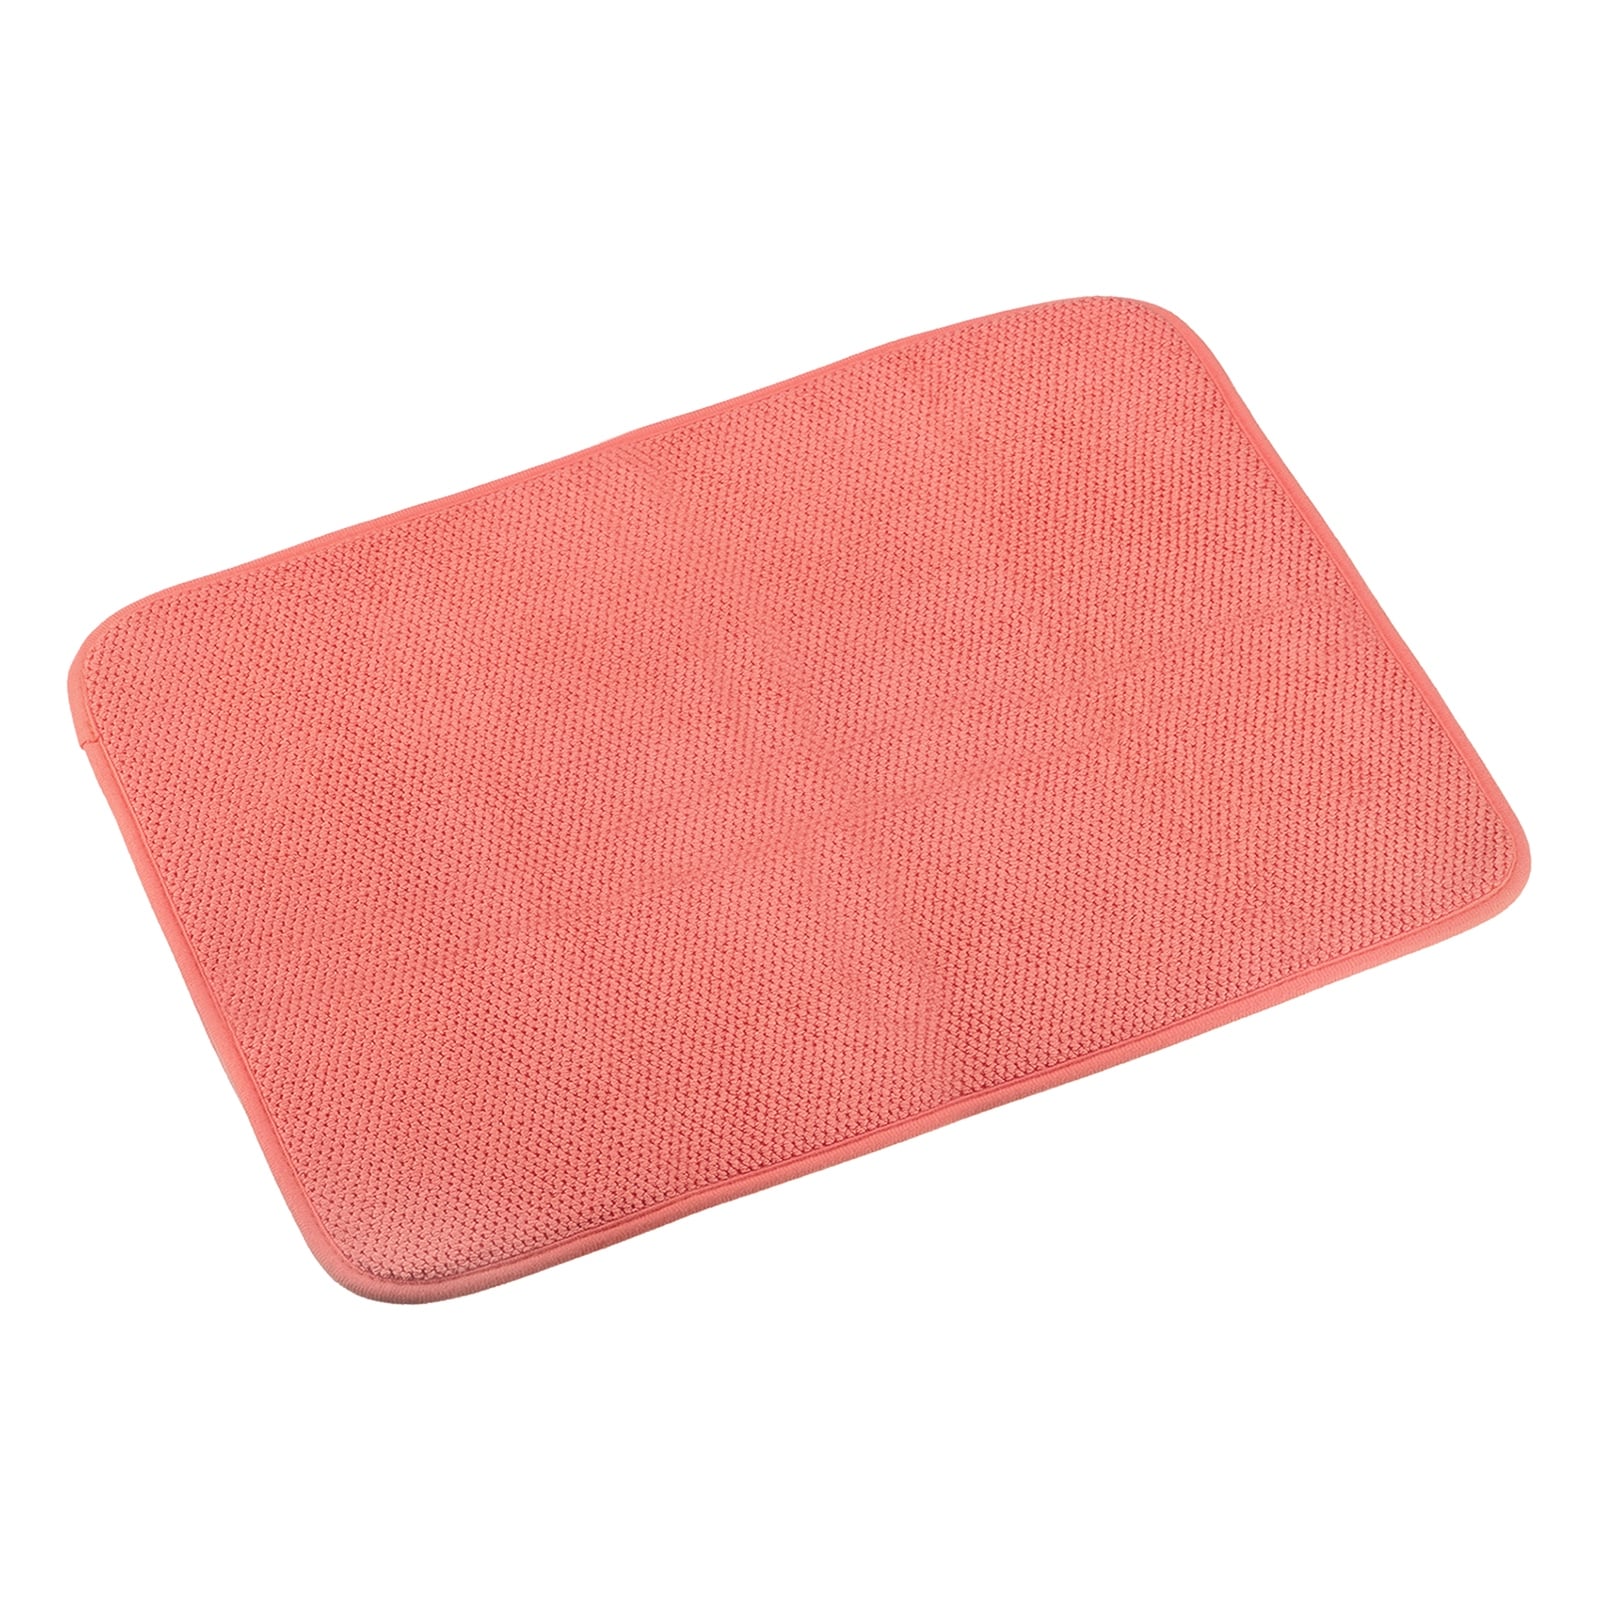 https://ak1.ostkcdn.com/images/products/is/images/direct/e01e8a6af70b8ab39ee1573b88a57b71960e8f10/Dish-Drying-Mat-2pcs%2C-Microfiber-Dish-Drying-Pad-Dish-Drainer-Mat-Red.jpg